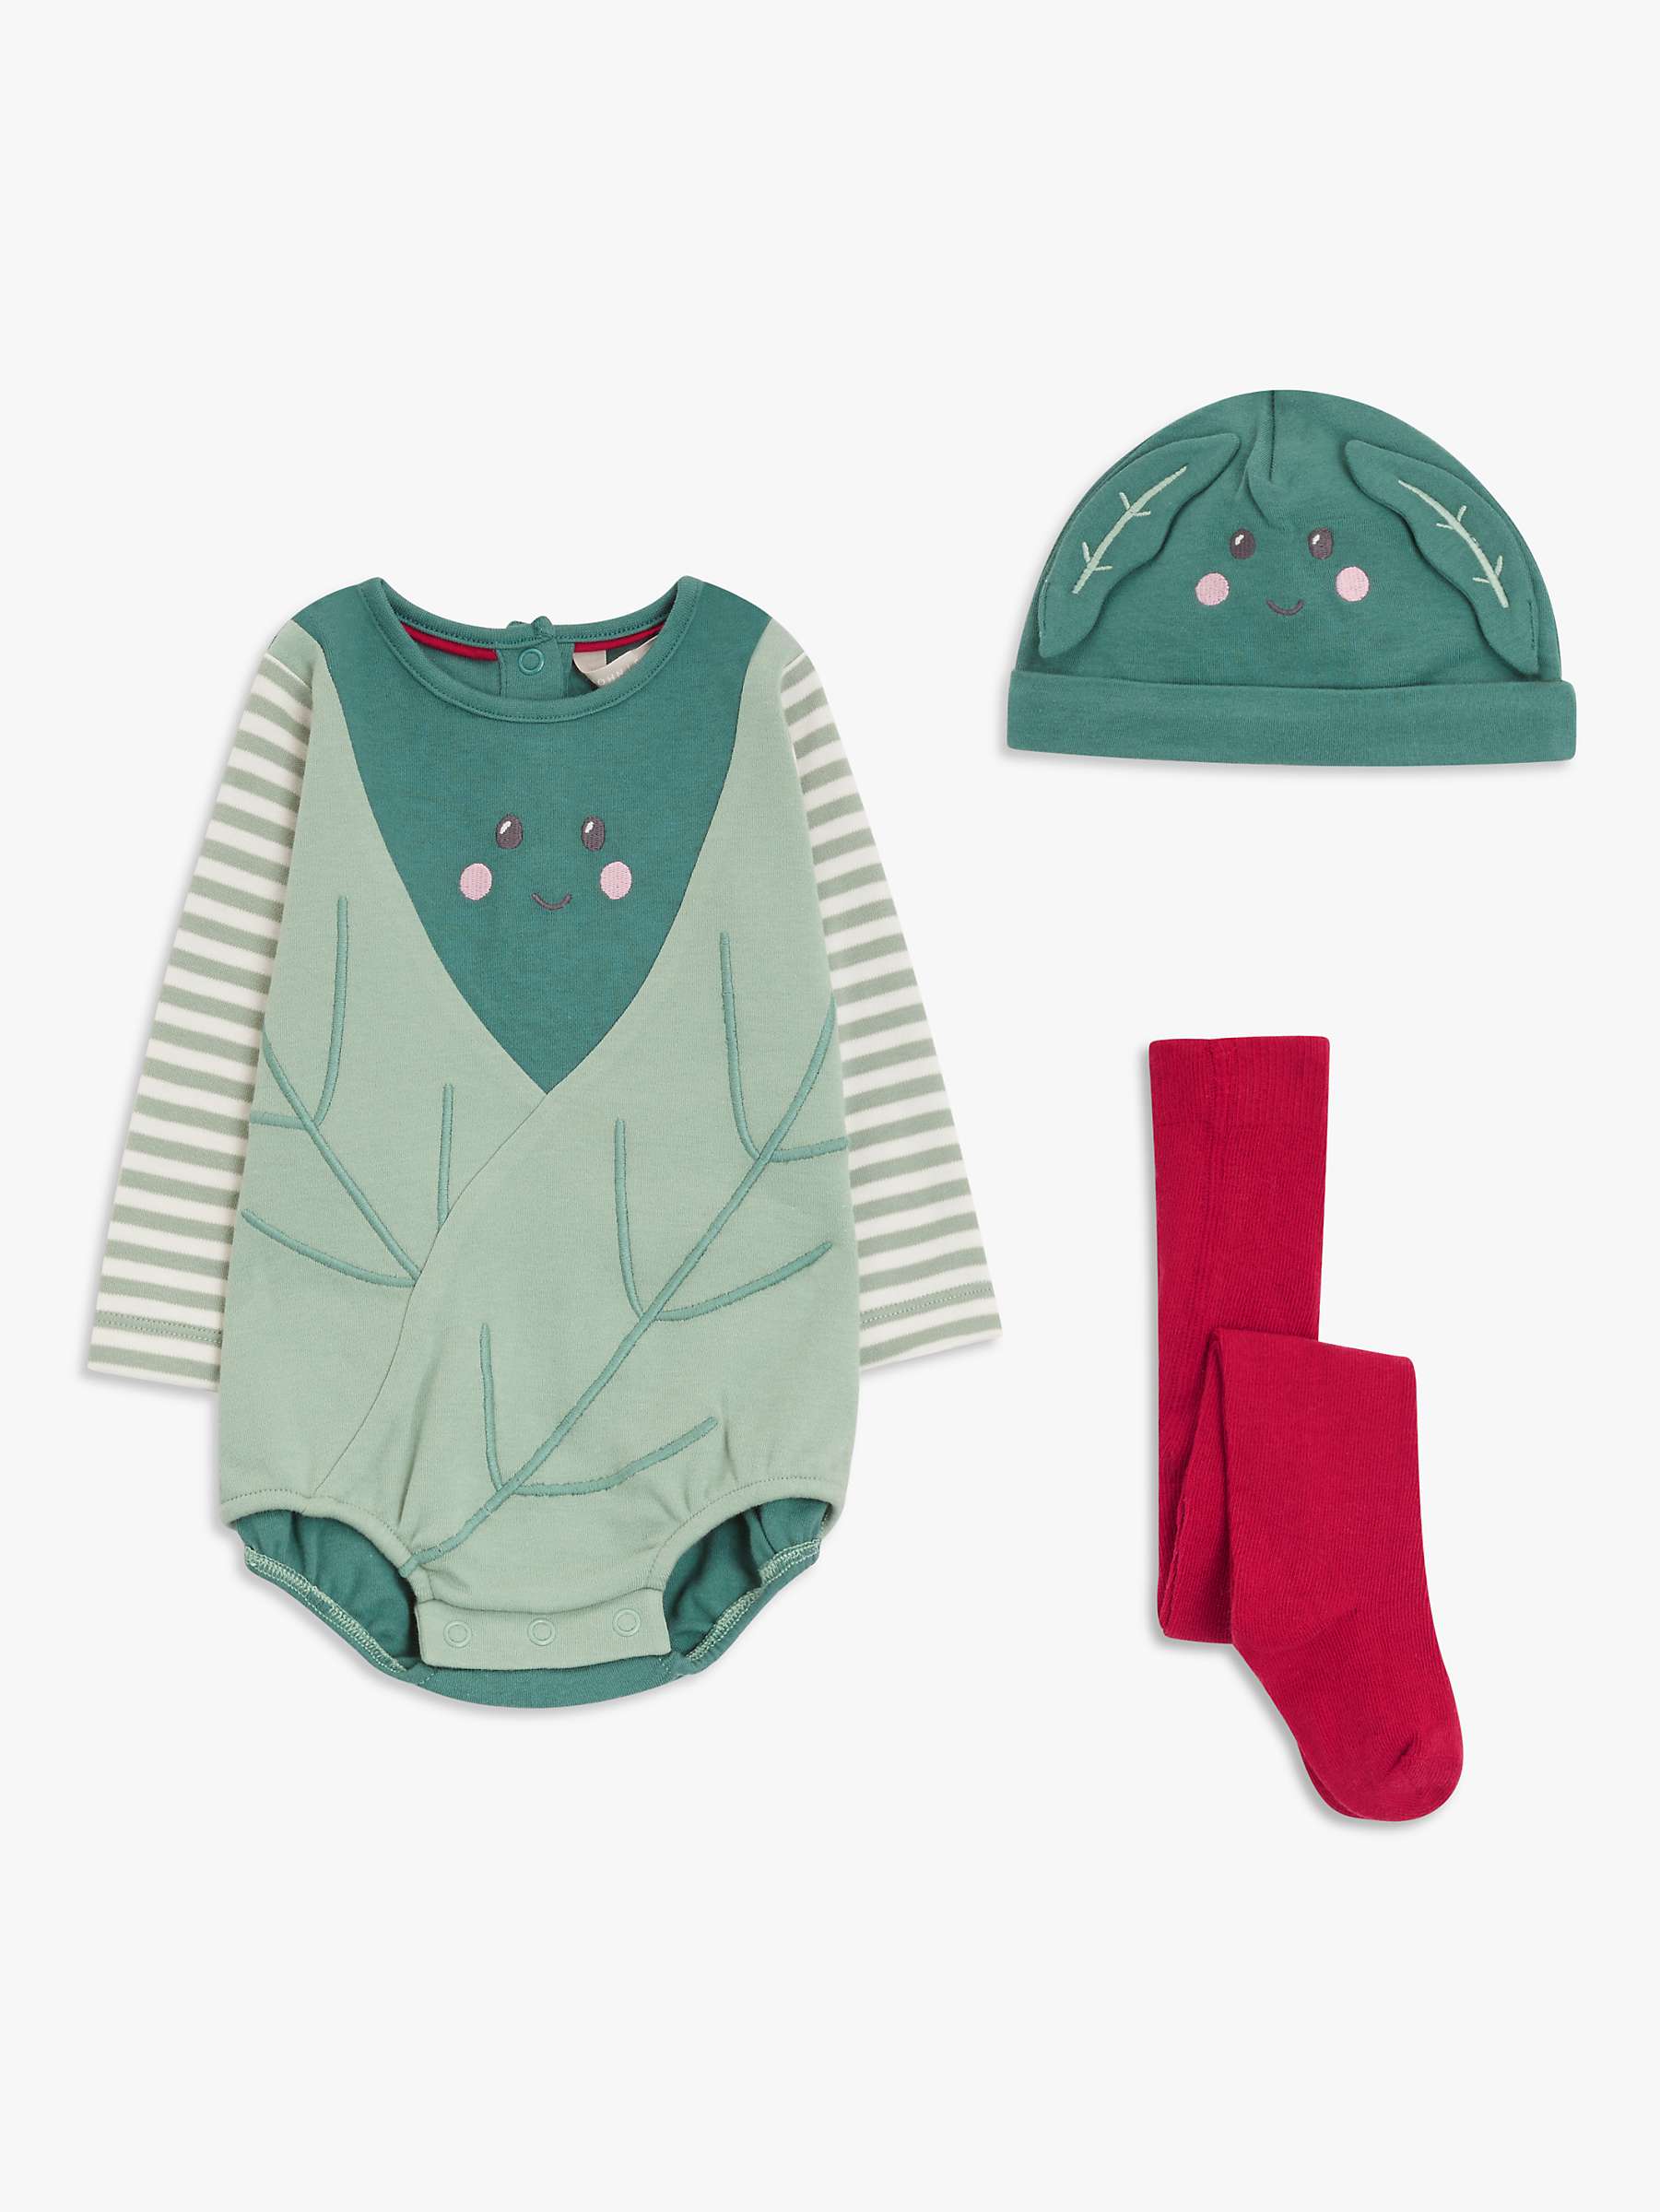 Buy John Lewis Baby Christmas Sprout Bodysuit, Hat & Tights Set, Green Online at johnlewis.com